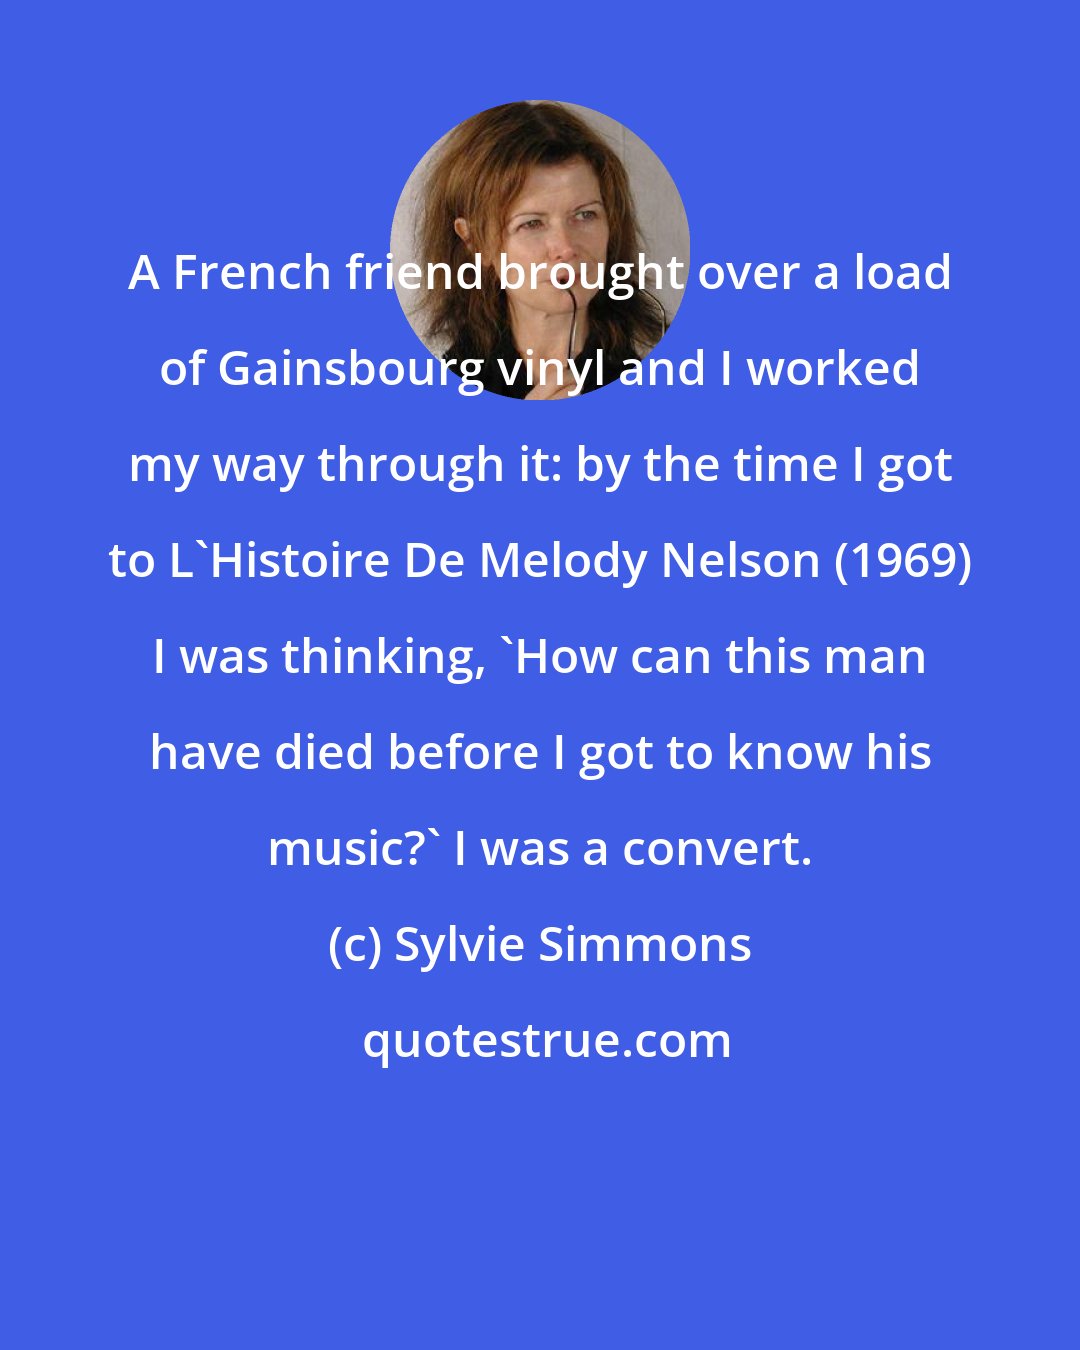 Sylvie Simmons: A French friend brought over a load of Gainsbourg vinyl and I worked my way through it: by the time I got to L'Histoire De Melody Nelson (1969) I was thinking, 'How can this man have died before I got to know his music?' I was a convert.